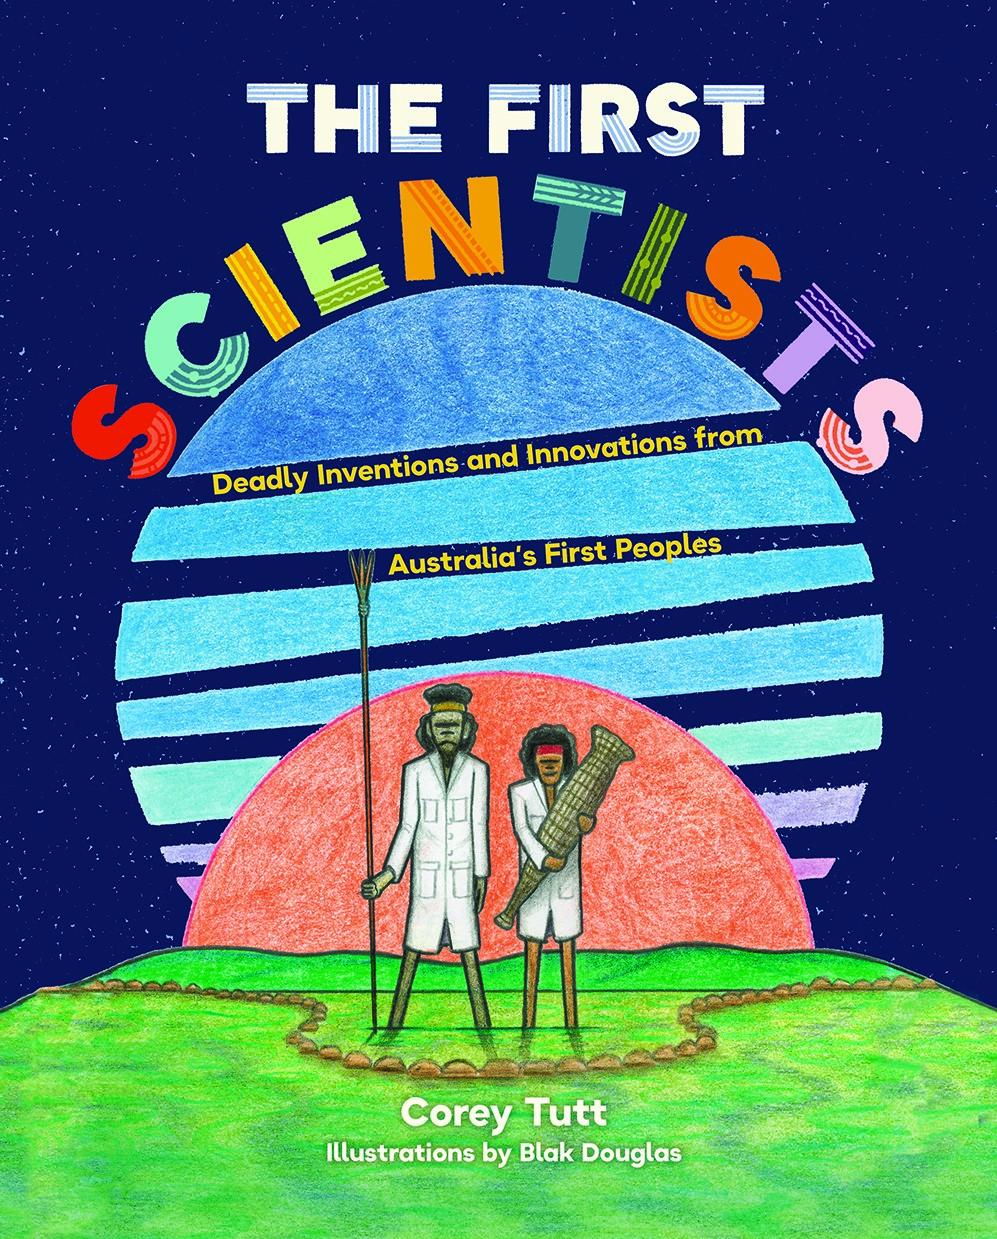 Cover of The First Scientists by Corey Tutt; two Aboriginal people stand in the centre of a stylised green land with a red sun rising behind them